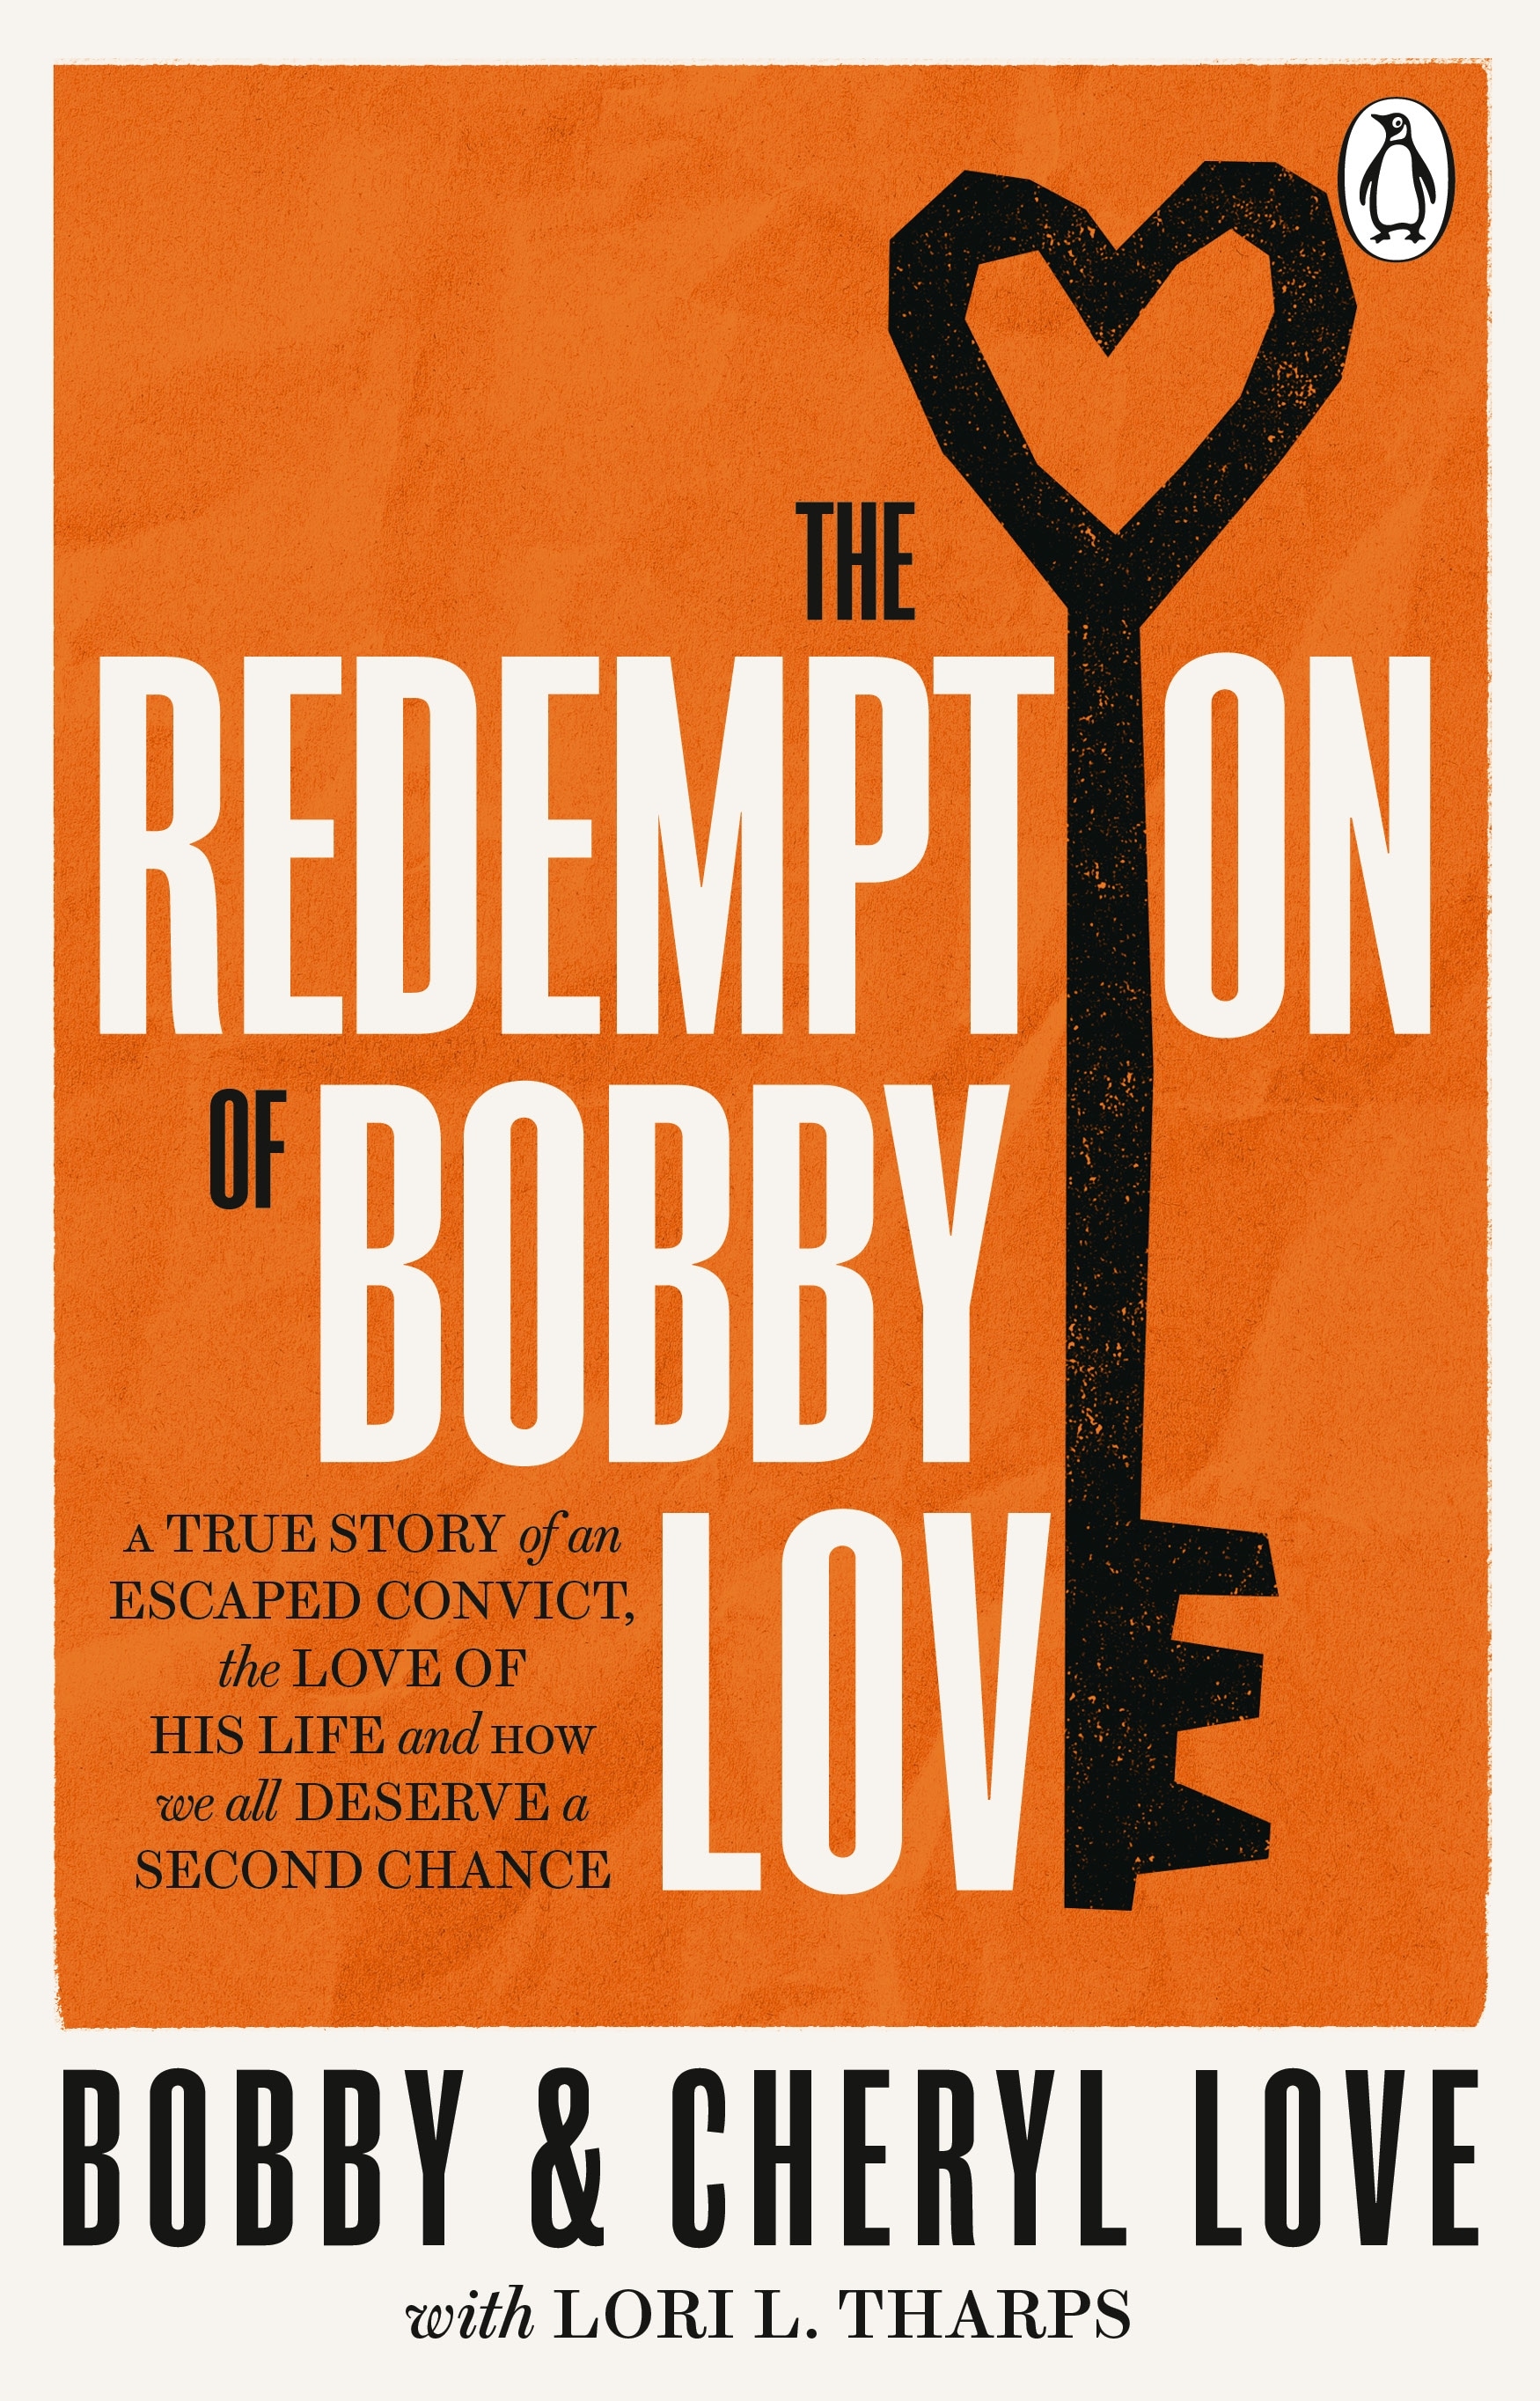 Book “The Redemption of Bobby Love” by Bobby Love, Cheryl Love — July 7, 2022